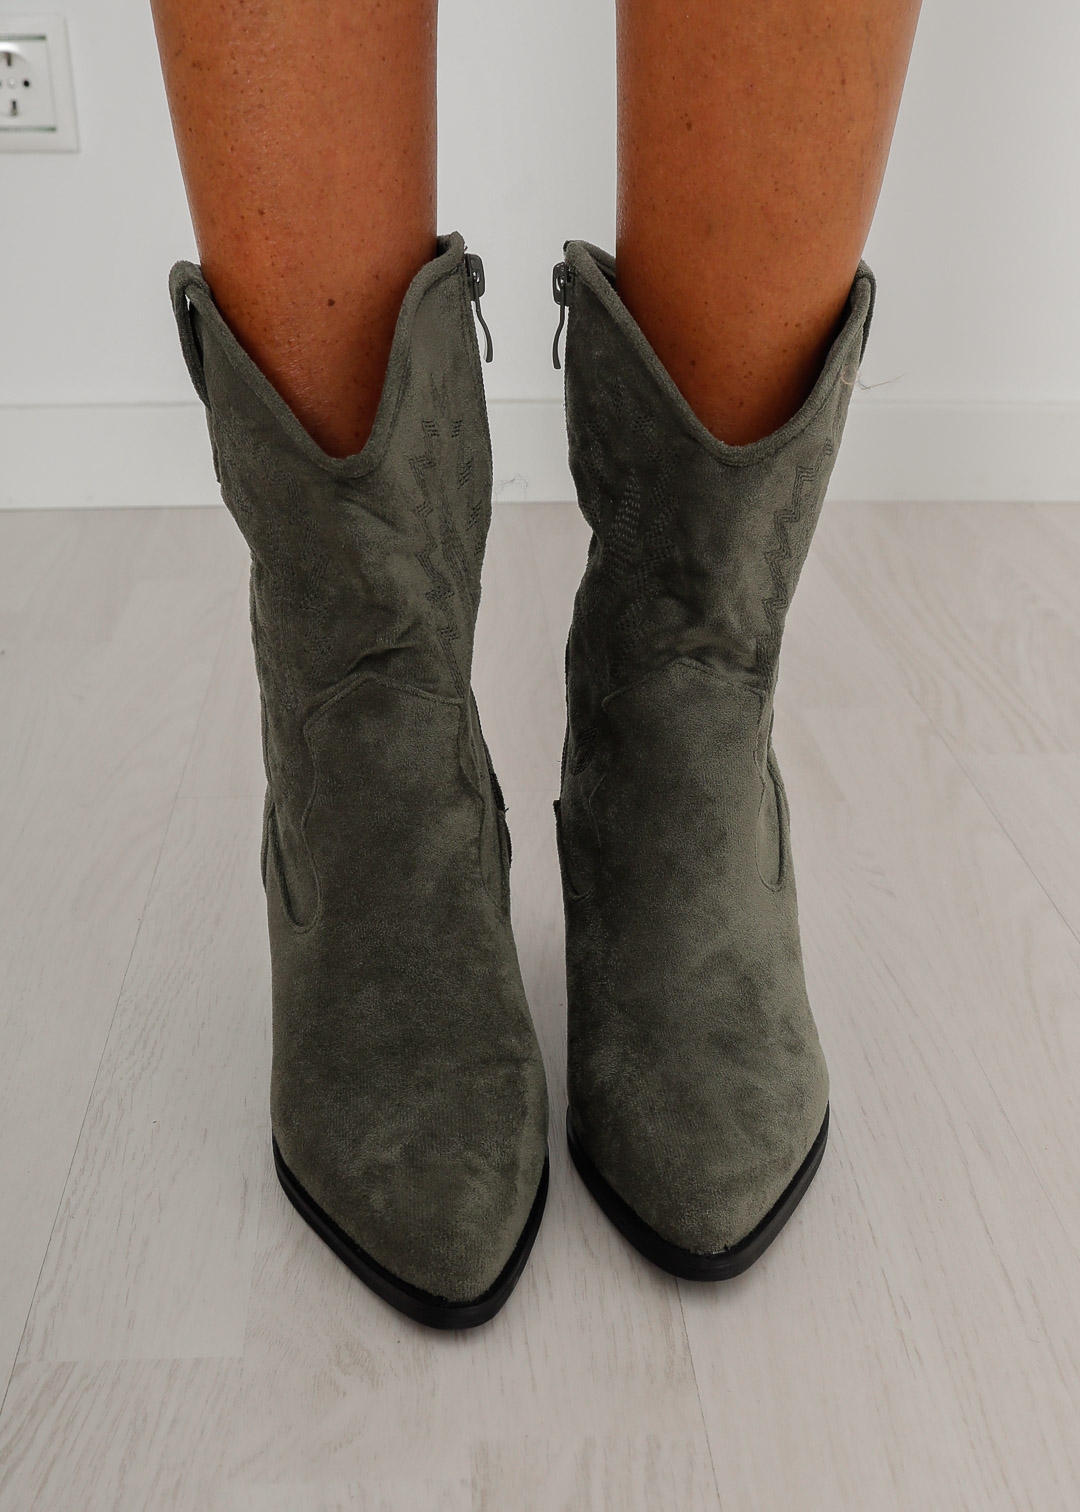 KHAKI COUNTRY BOOTS